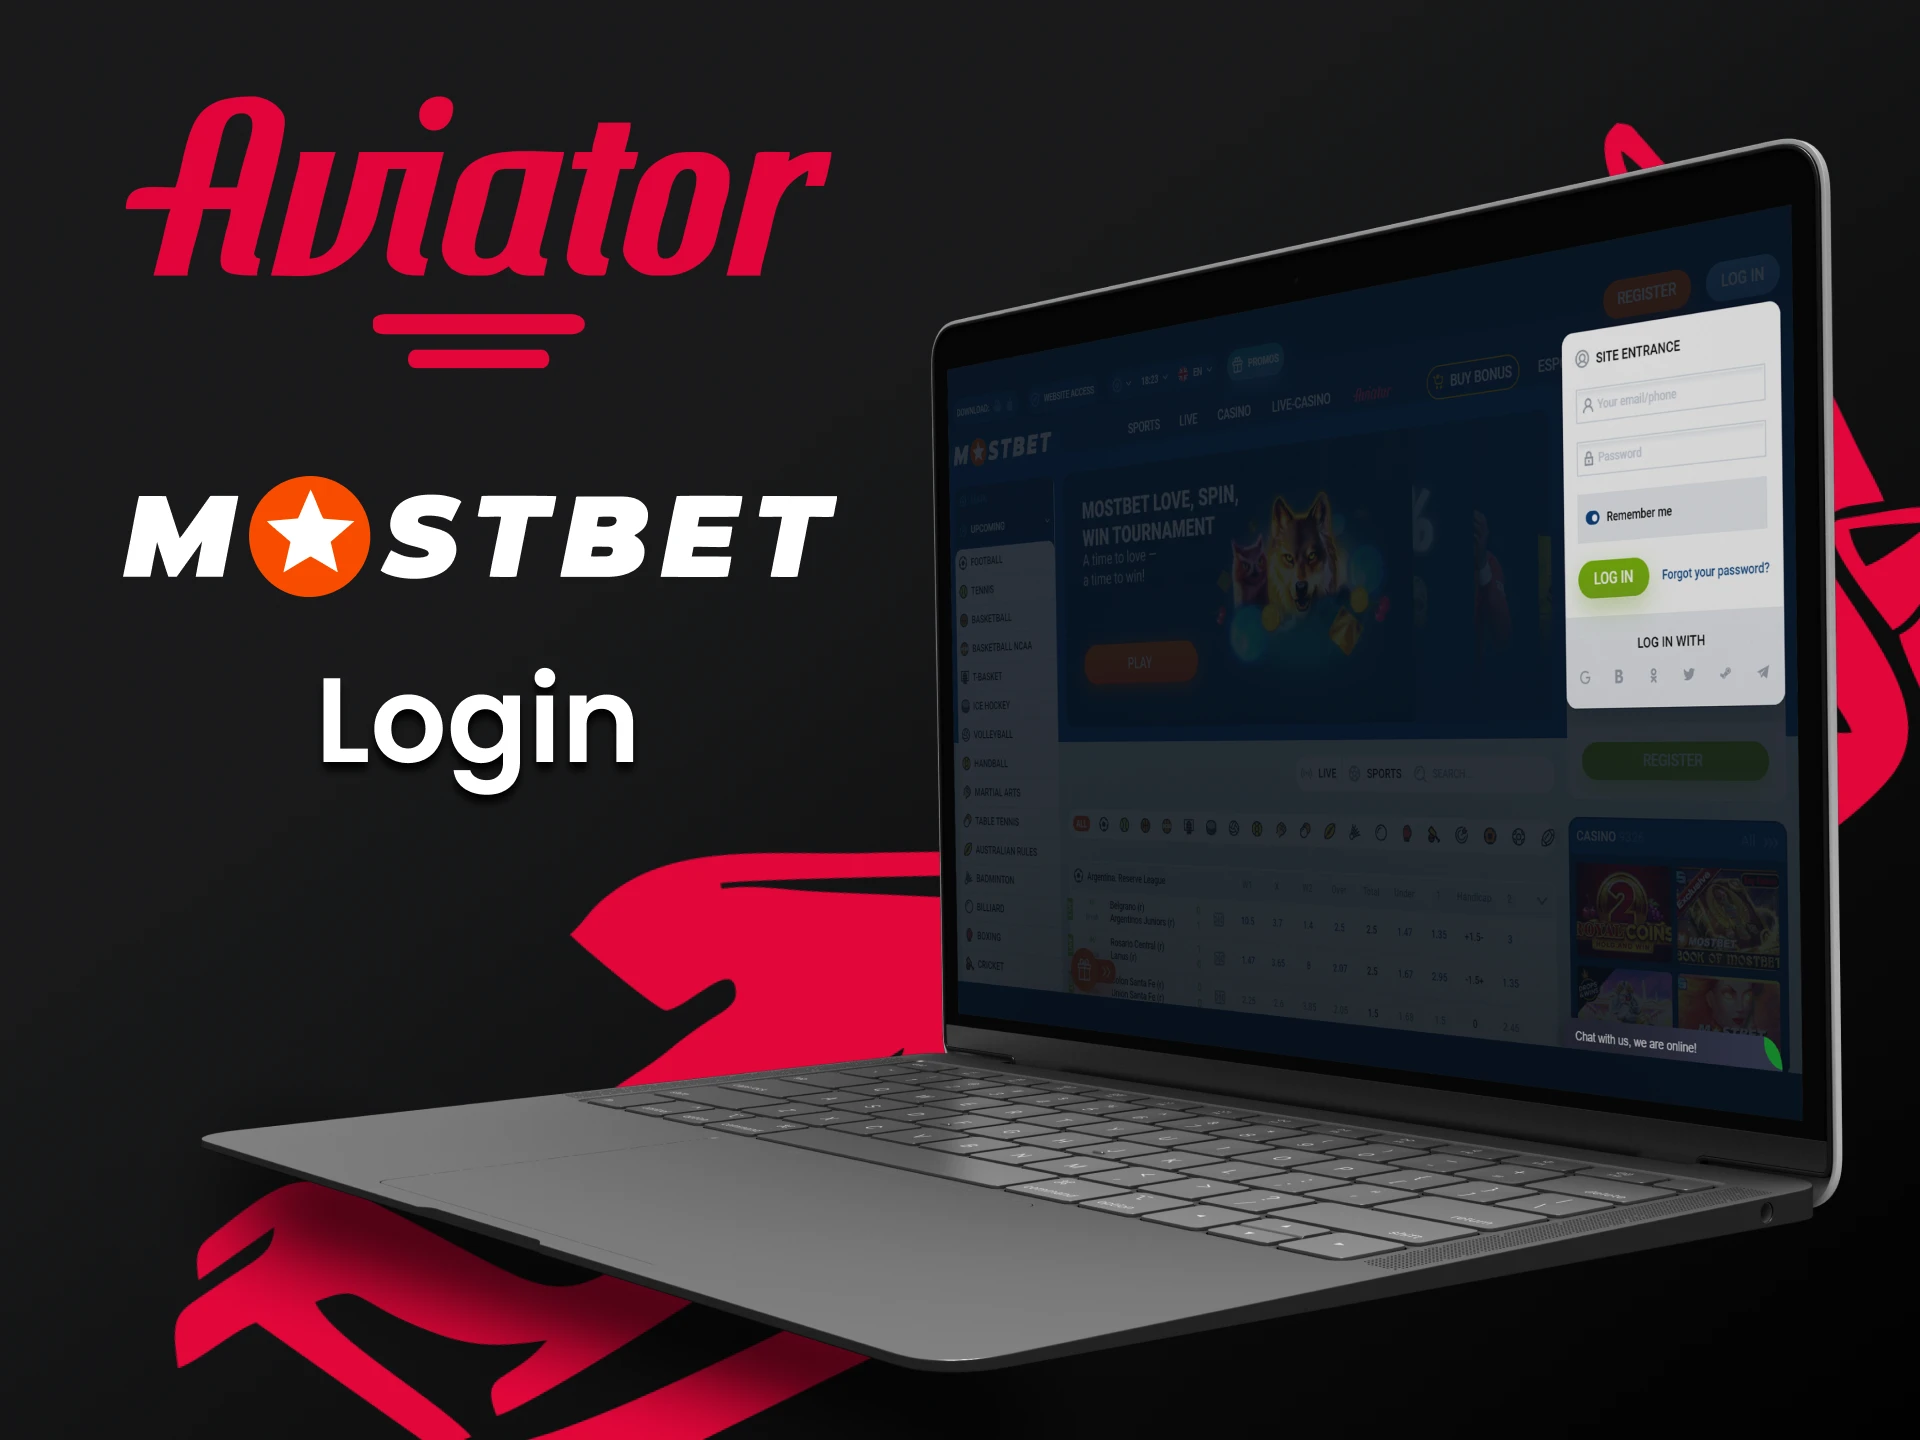 Login to your personal account to start playing Aviator on Mostbet.